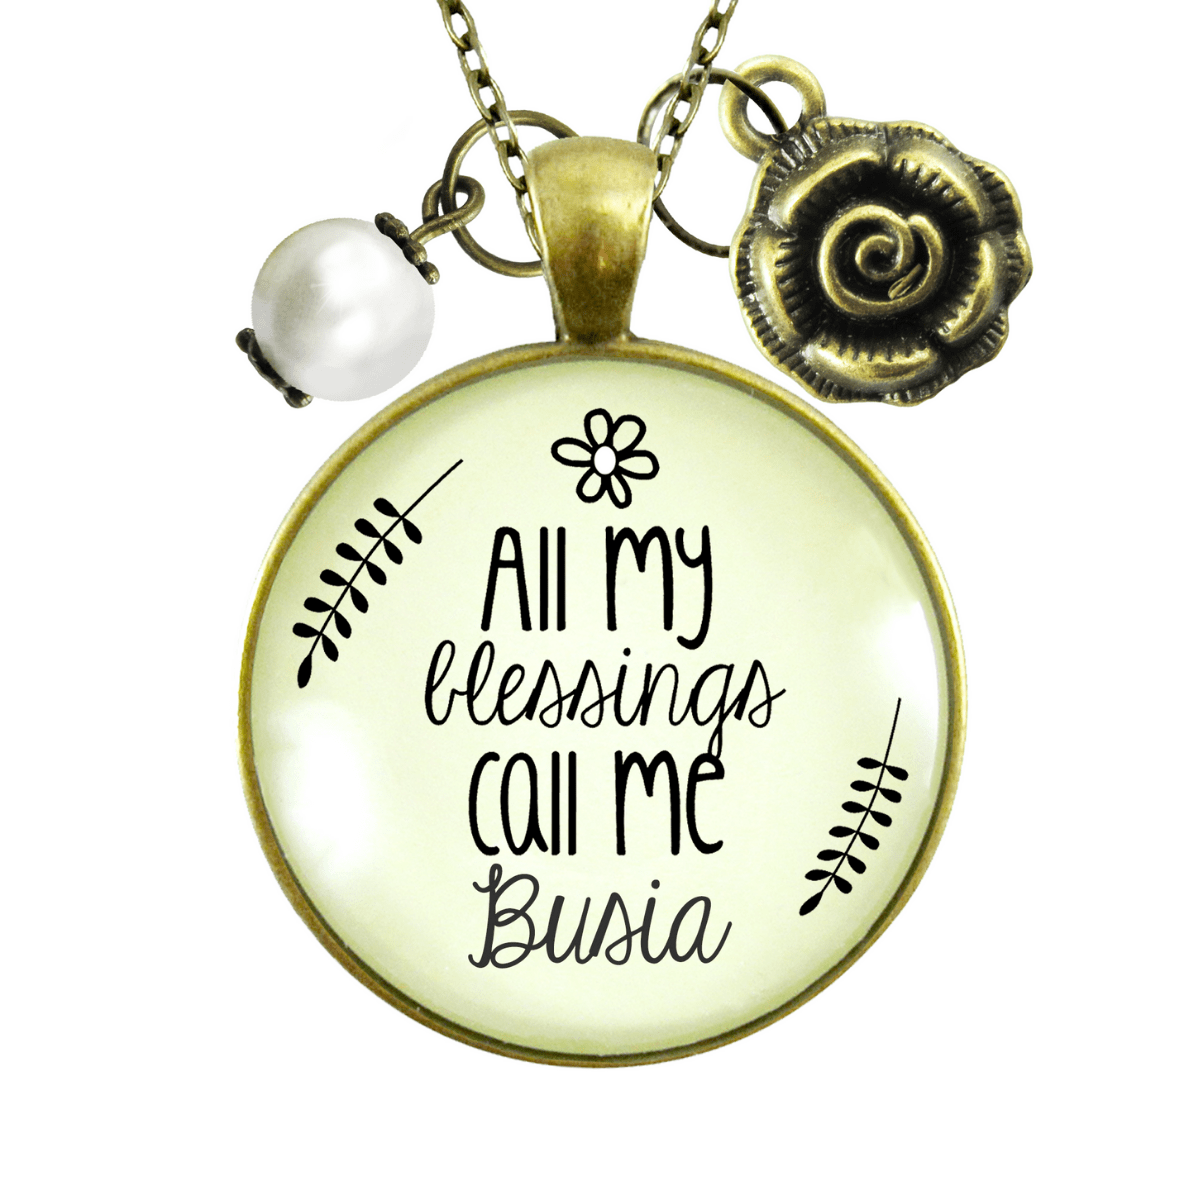 Gutsy Goodness Busia Necklace All My Blessings Polish Grandma Gift Jewelry - Gutsy Goodness Handmade Jewelry;Busia Necklace All My Blessings Polish Grandma Gift Jewelry - Gutsy Goodness Handmade Jewelry Gifts